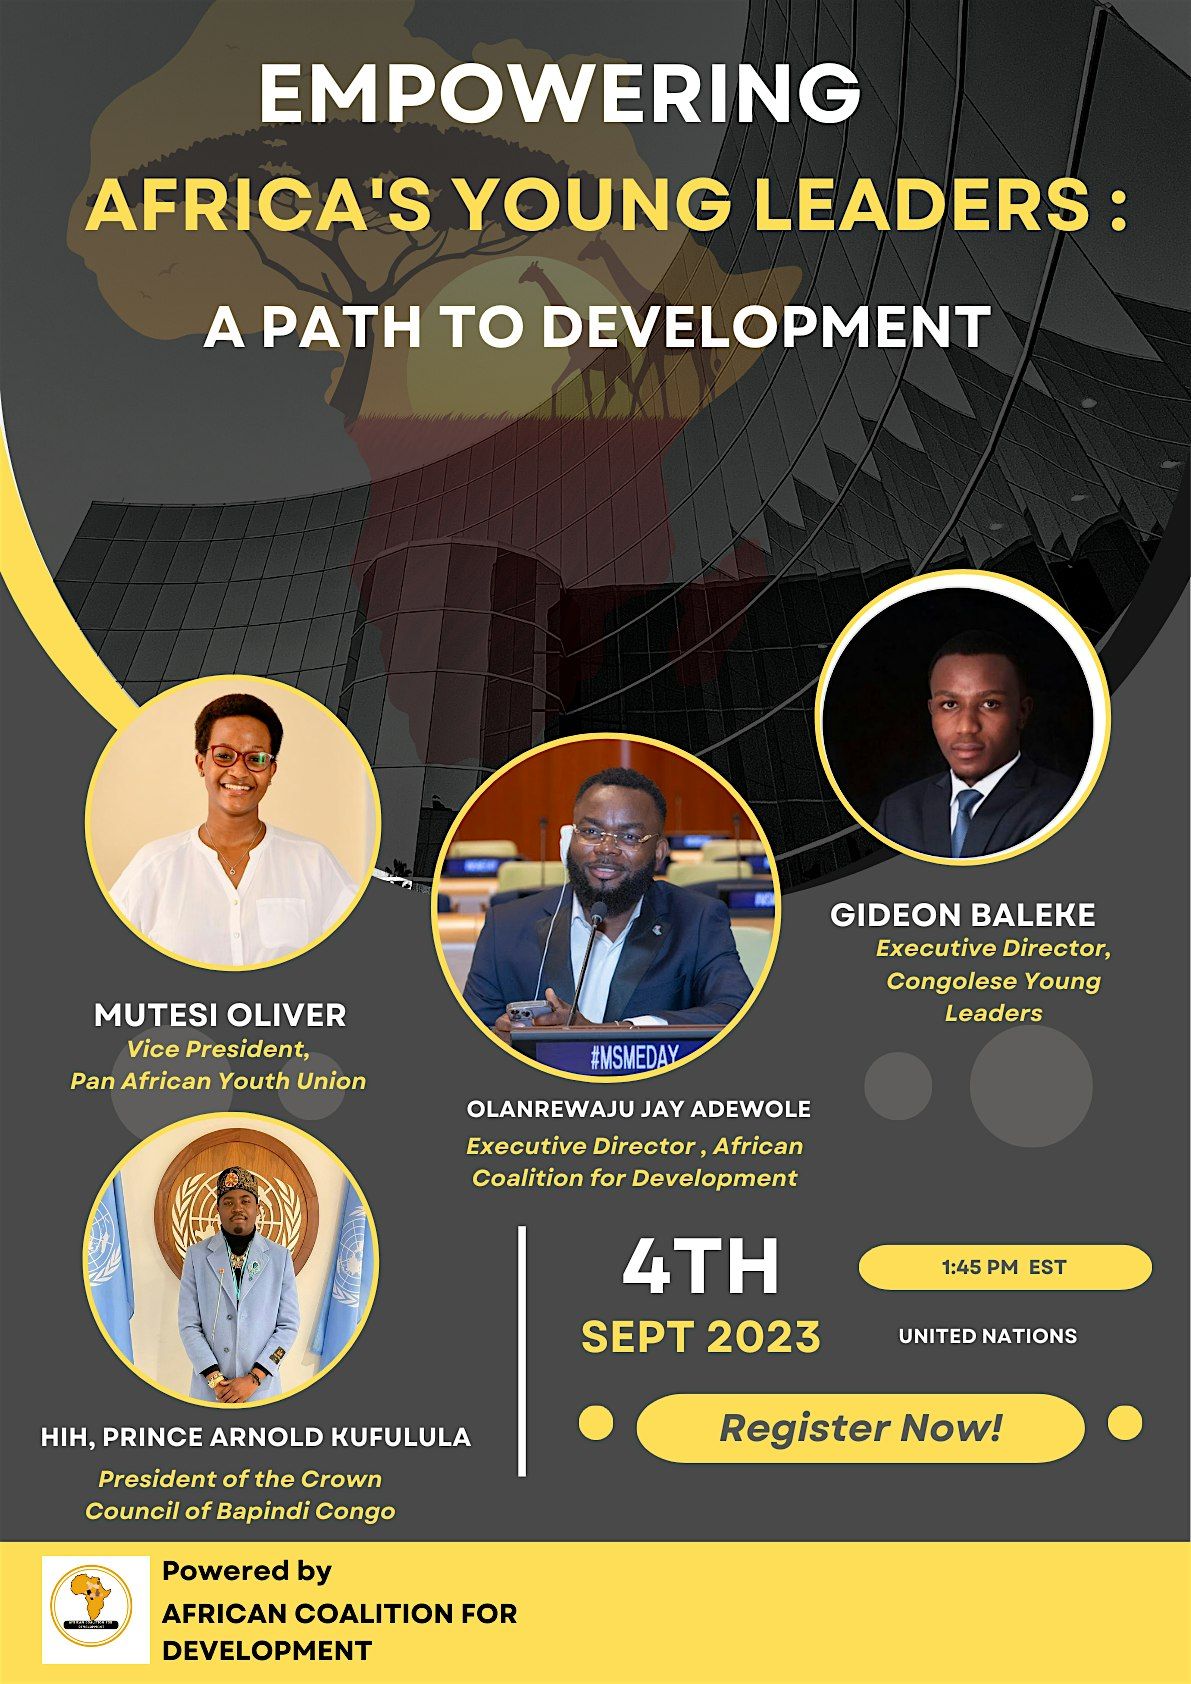 Empowering Africa's Young Leaders: A Path to Development